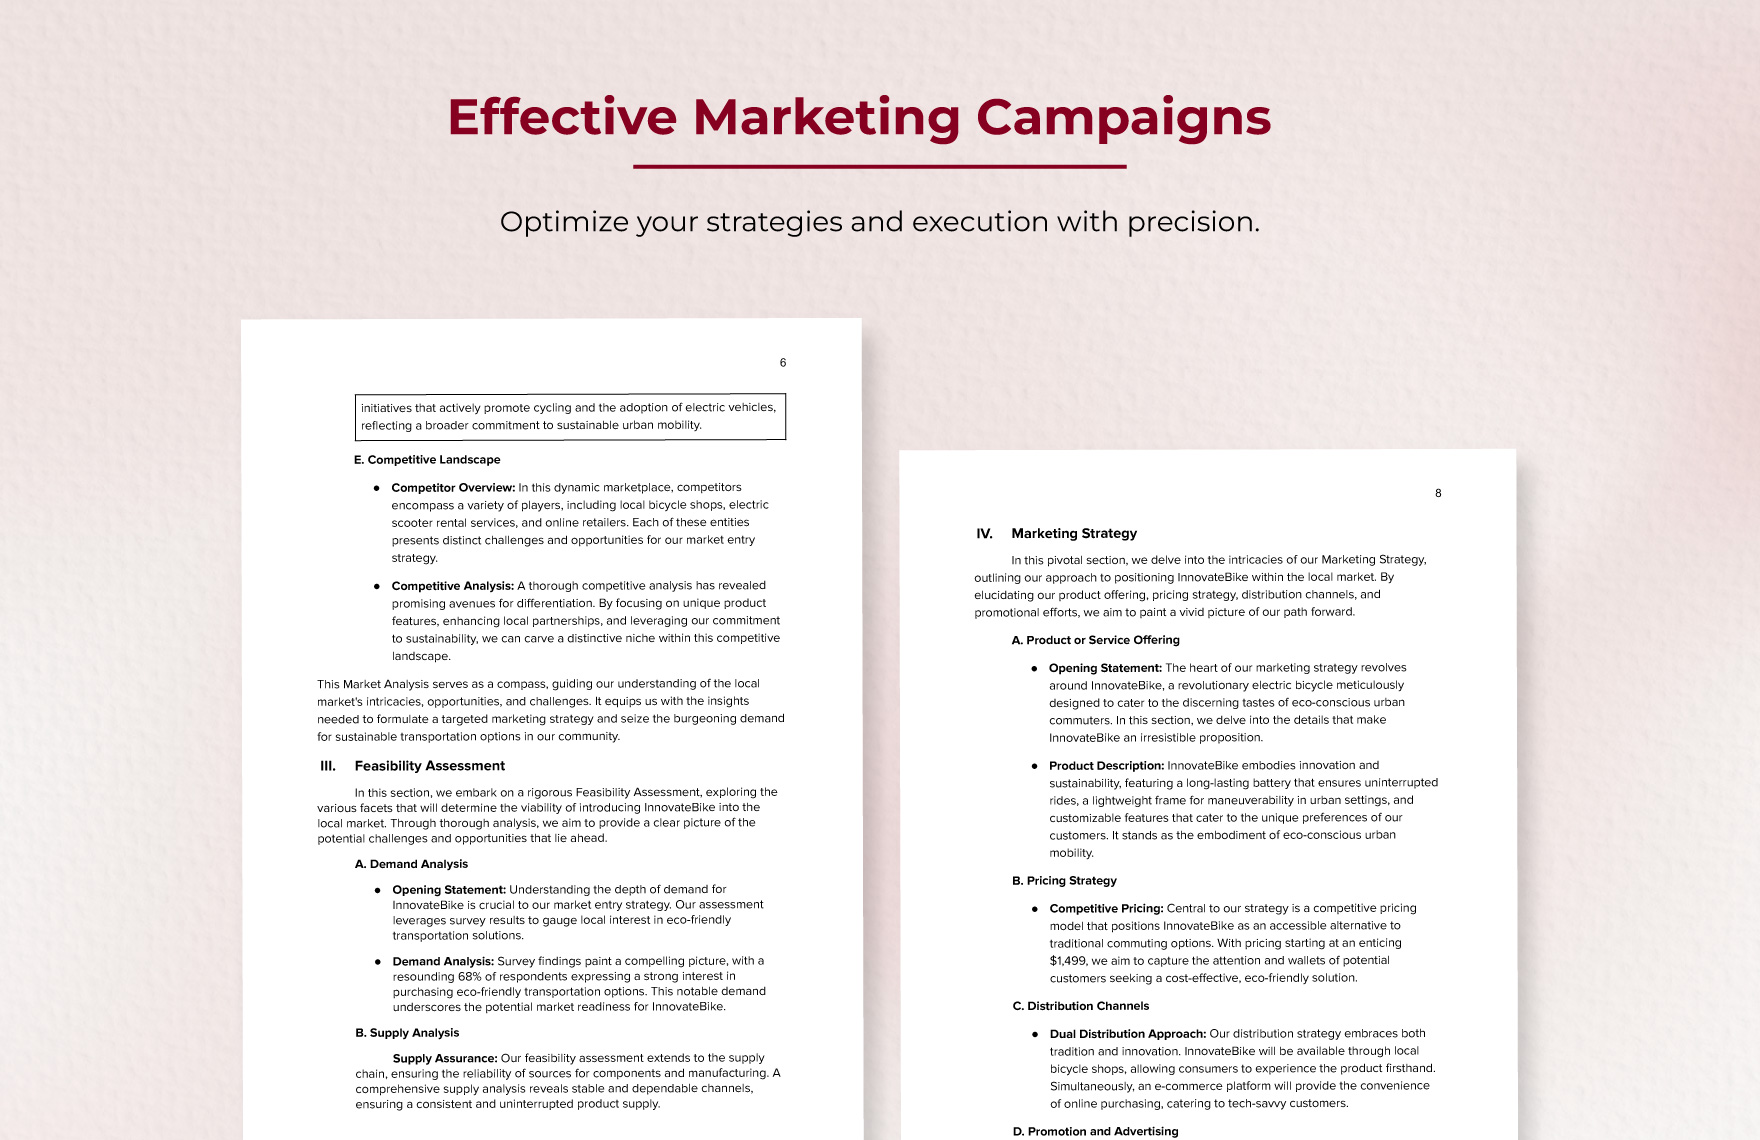 Marketing Local Market Feasibility Study Template